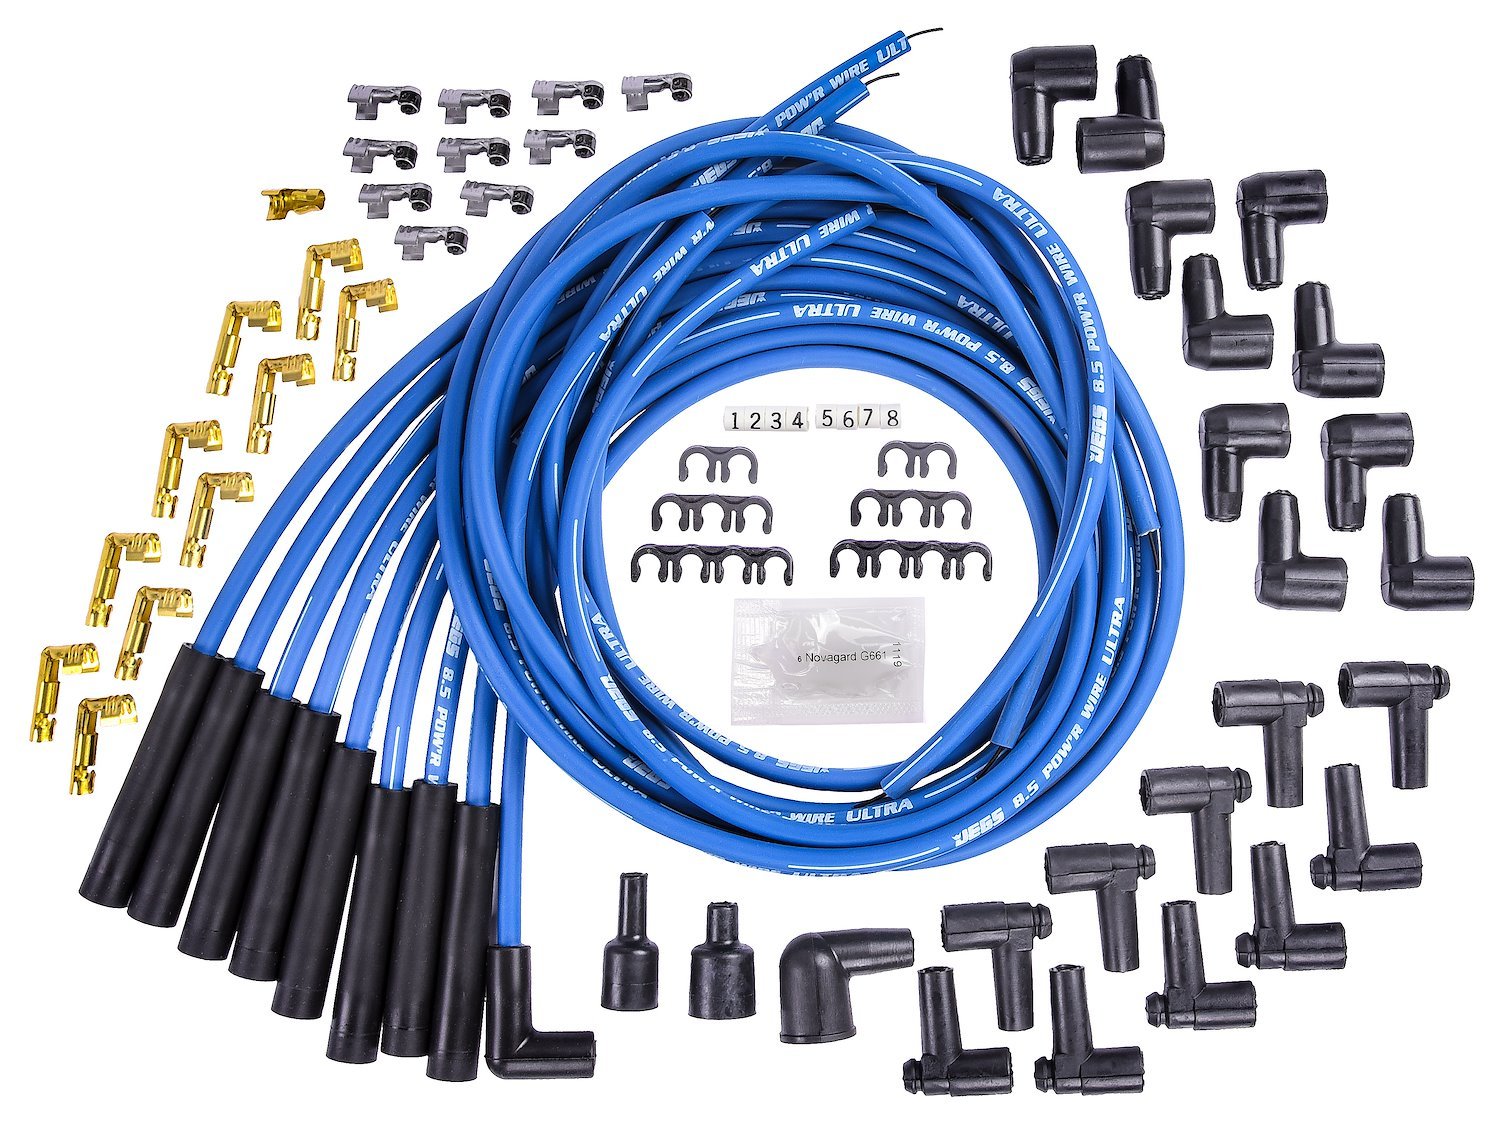 8.5mm Blue Ultra Power Wires for Small and